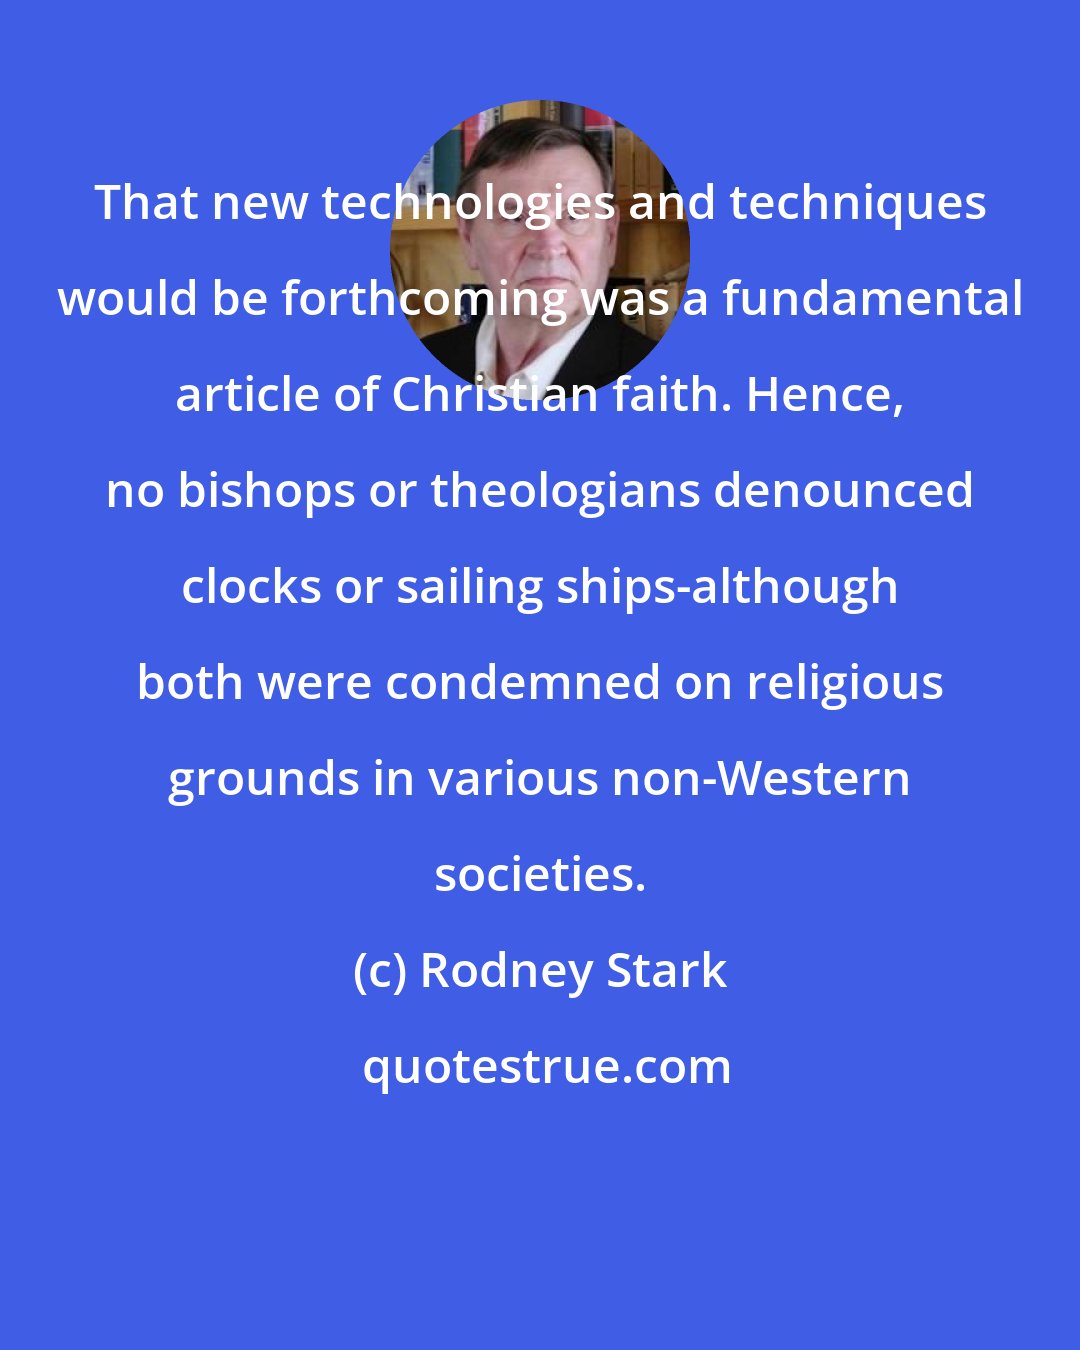 Rodney Stark: That new technologies and techniques would be forthcoming was a fundamental article of Christian faith. Hence, no bishops or theologians denounced clocks or sailing ships-although both were condemned on religious grounds in various non-Western societies.